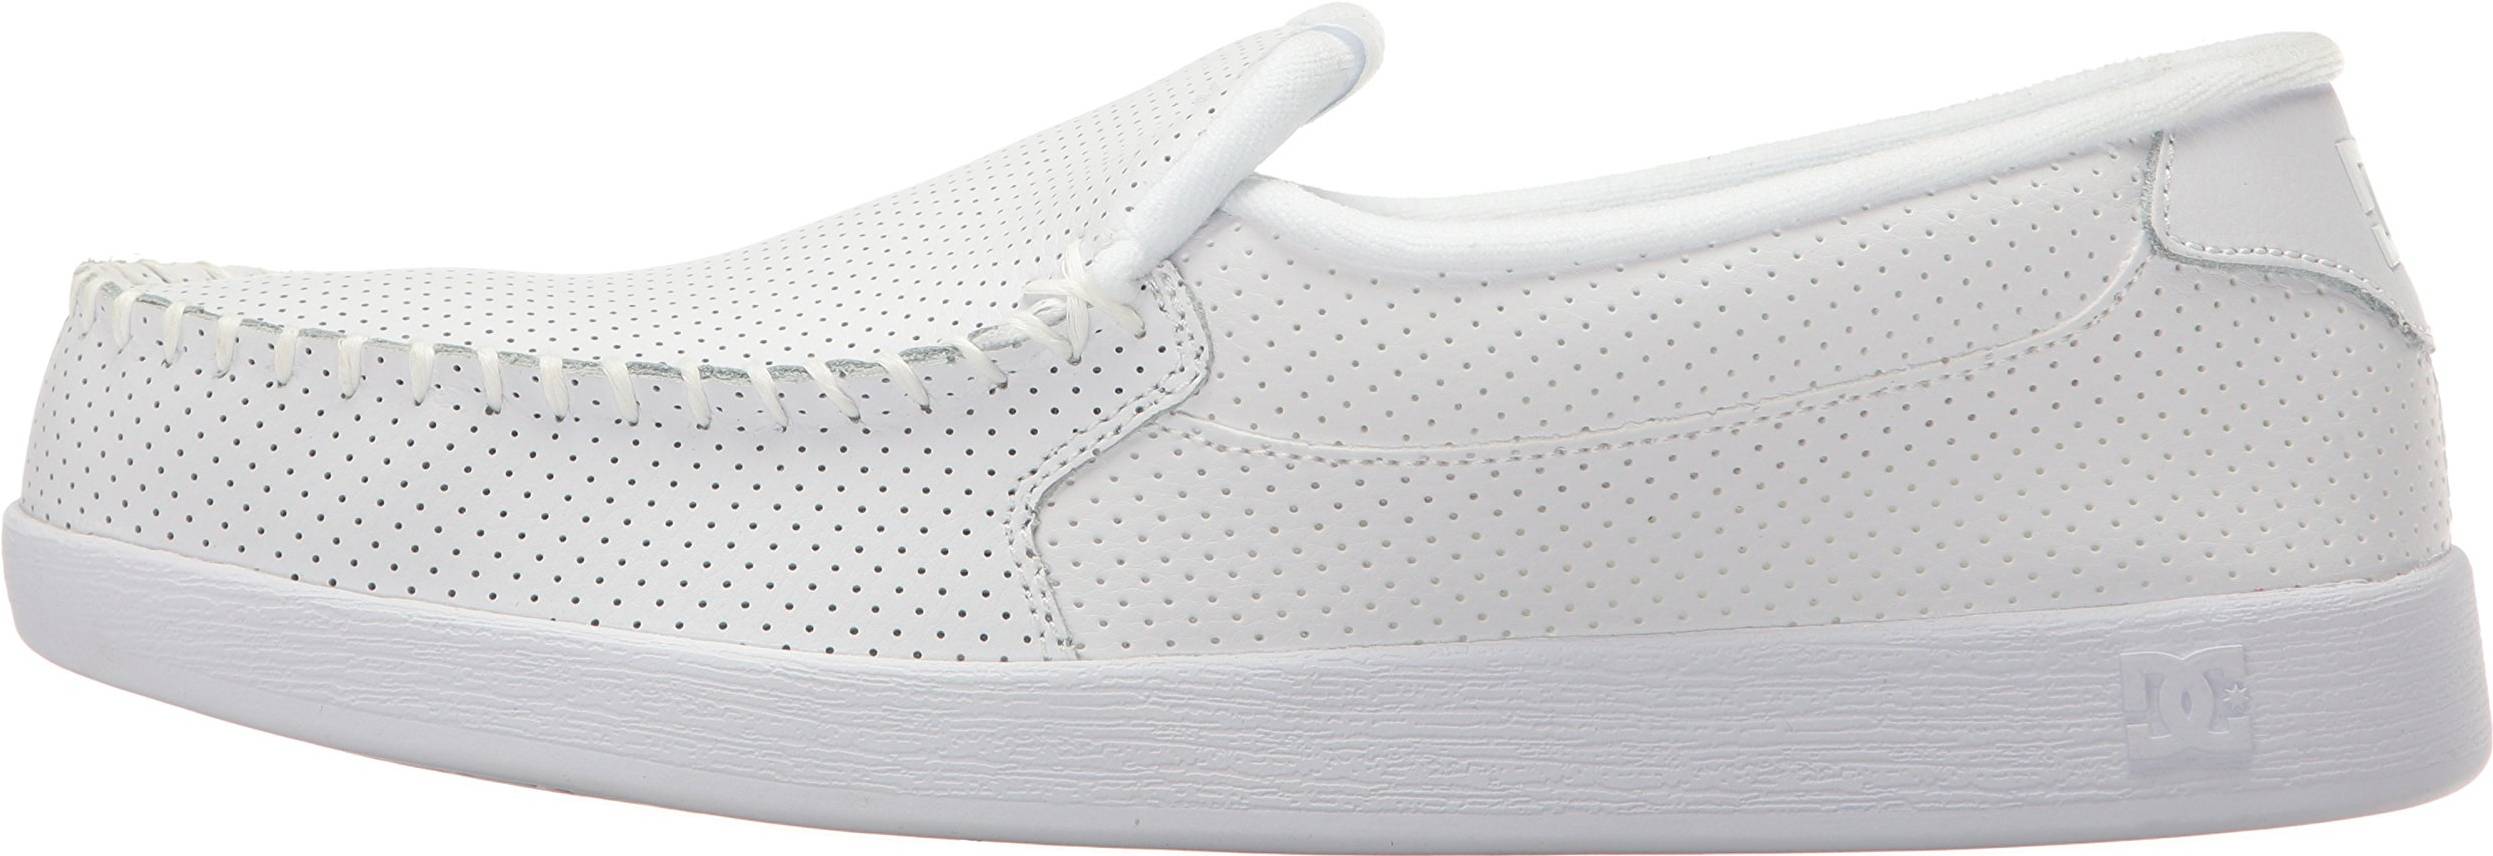 DC Villain sneakers in white (only $55 